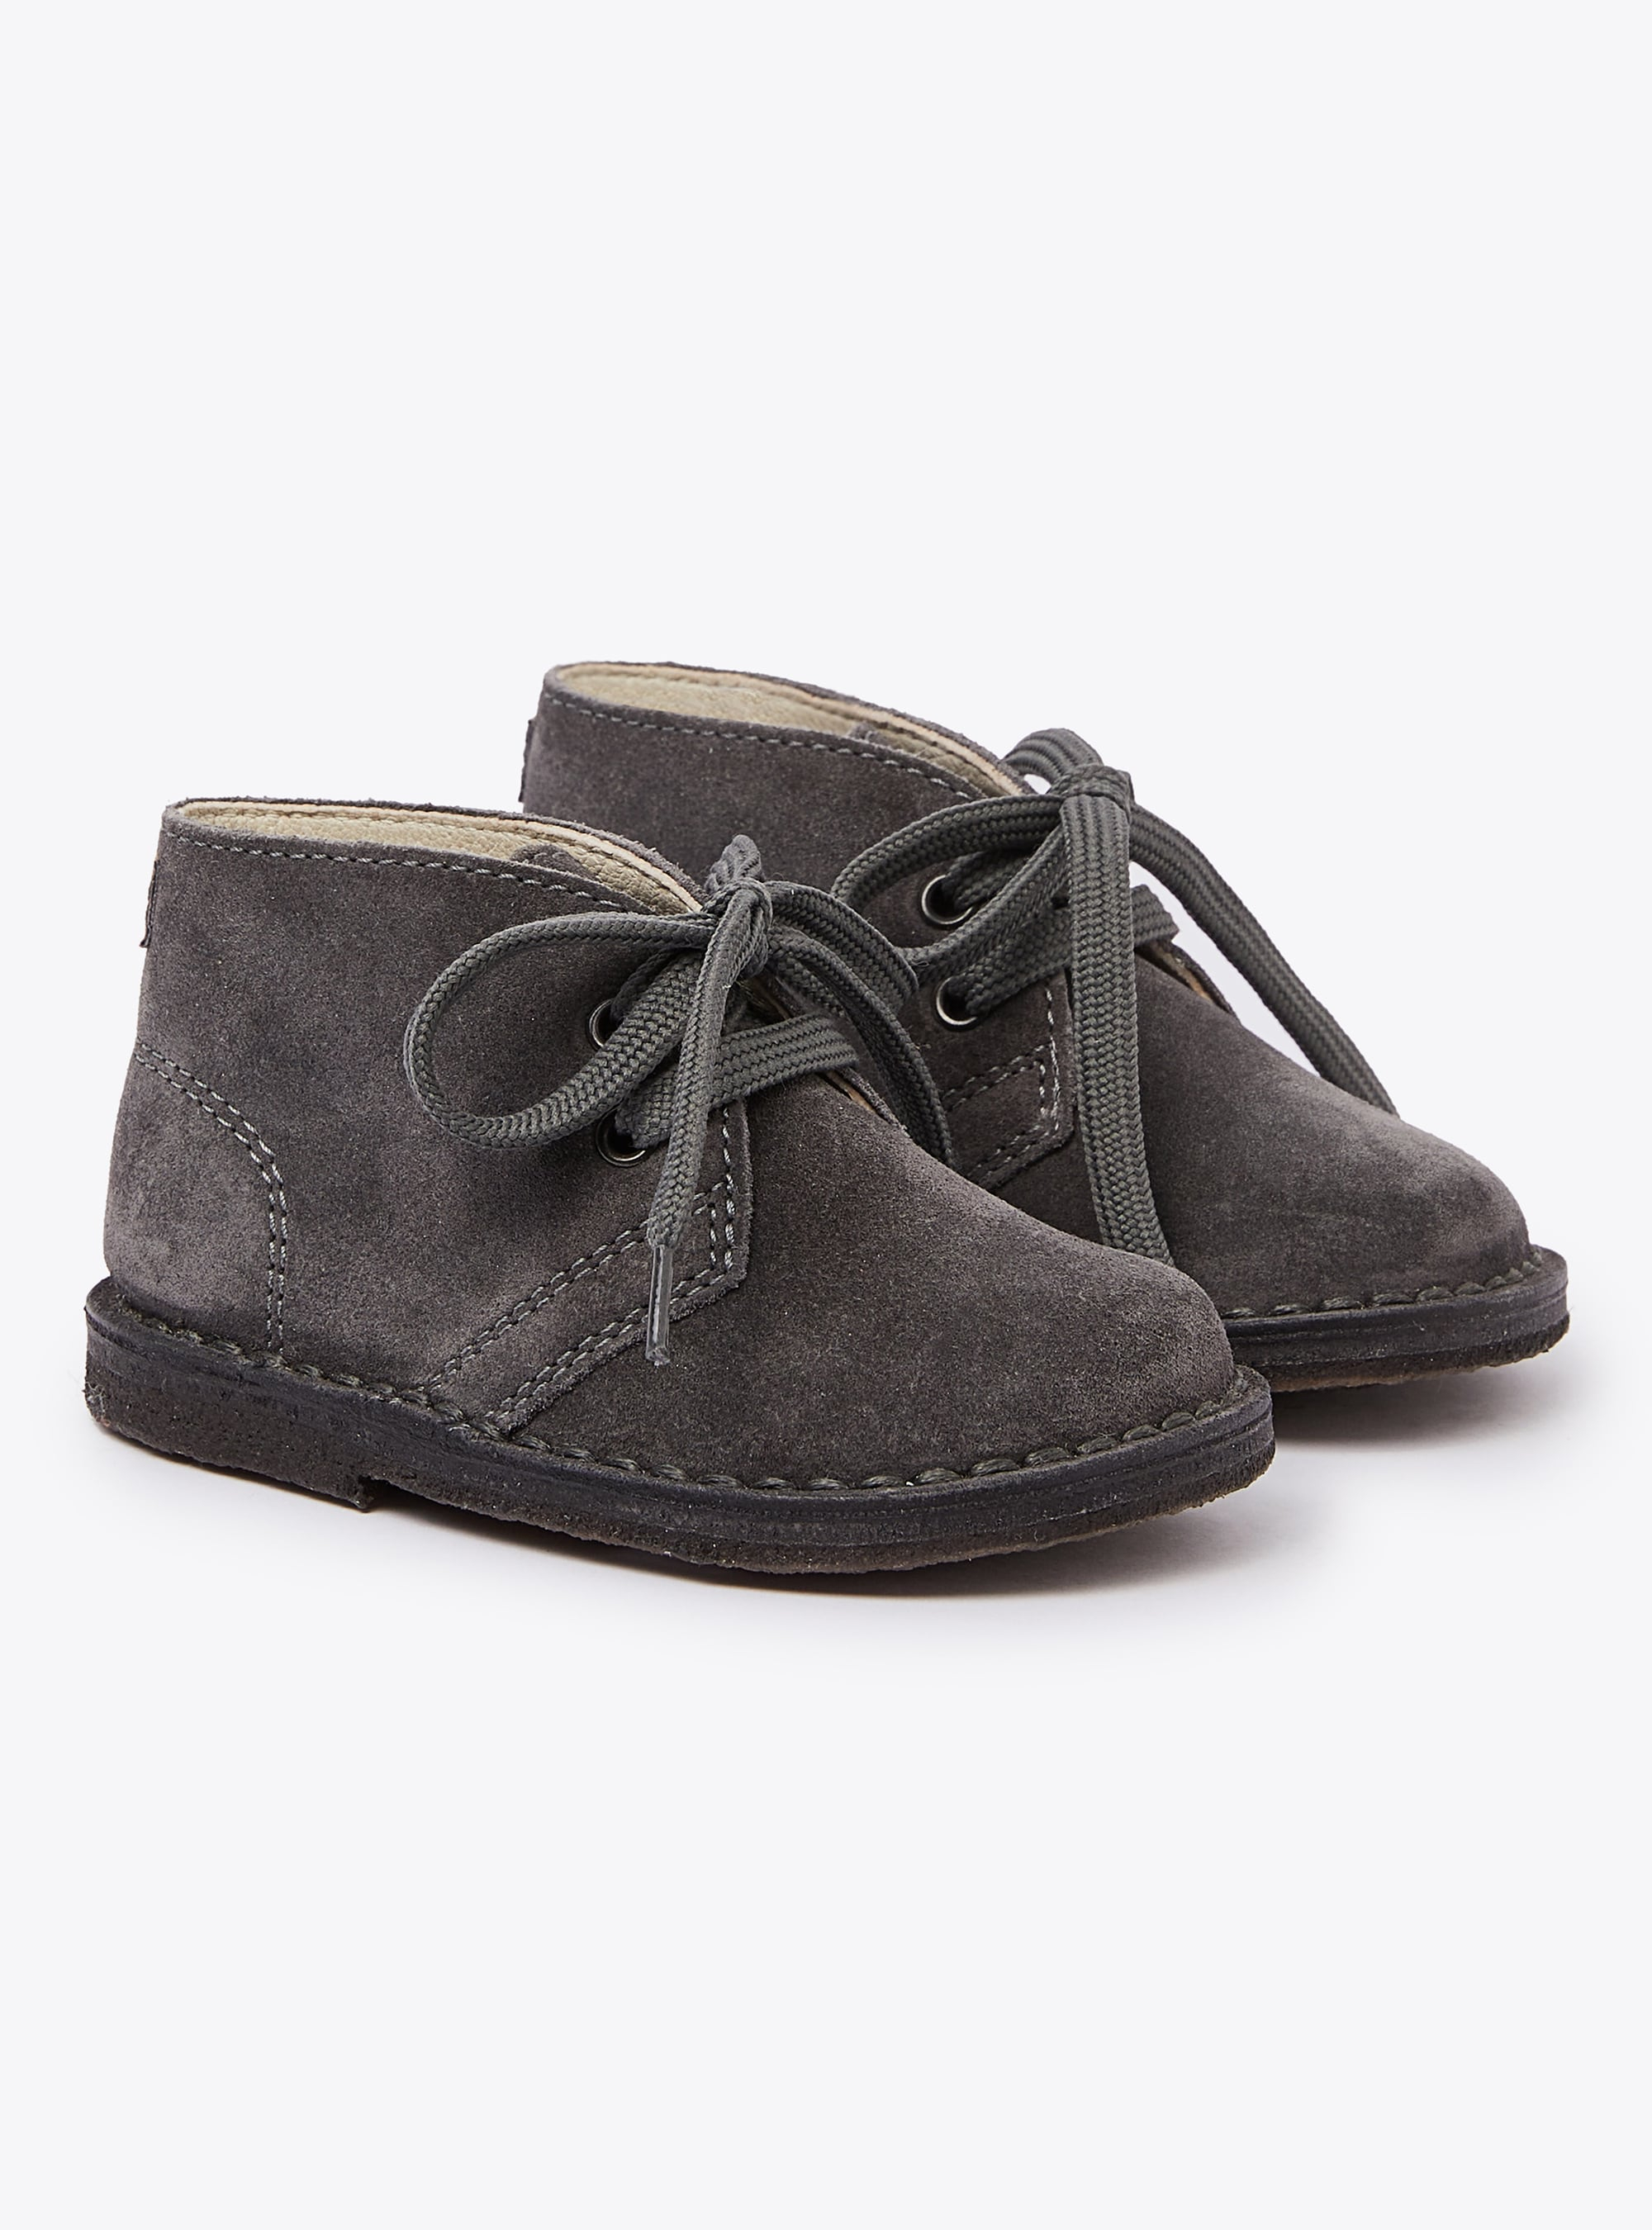 Charcoal grey suede baby shoes - Grey | Il Gufo